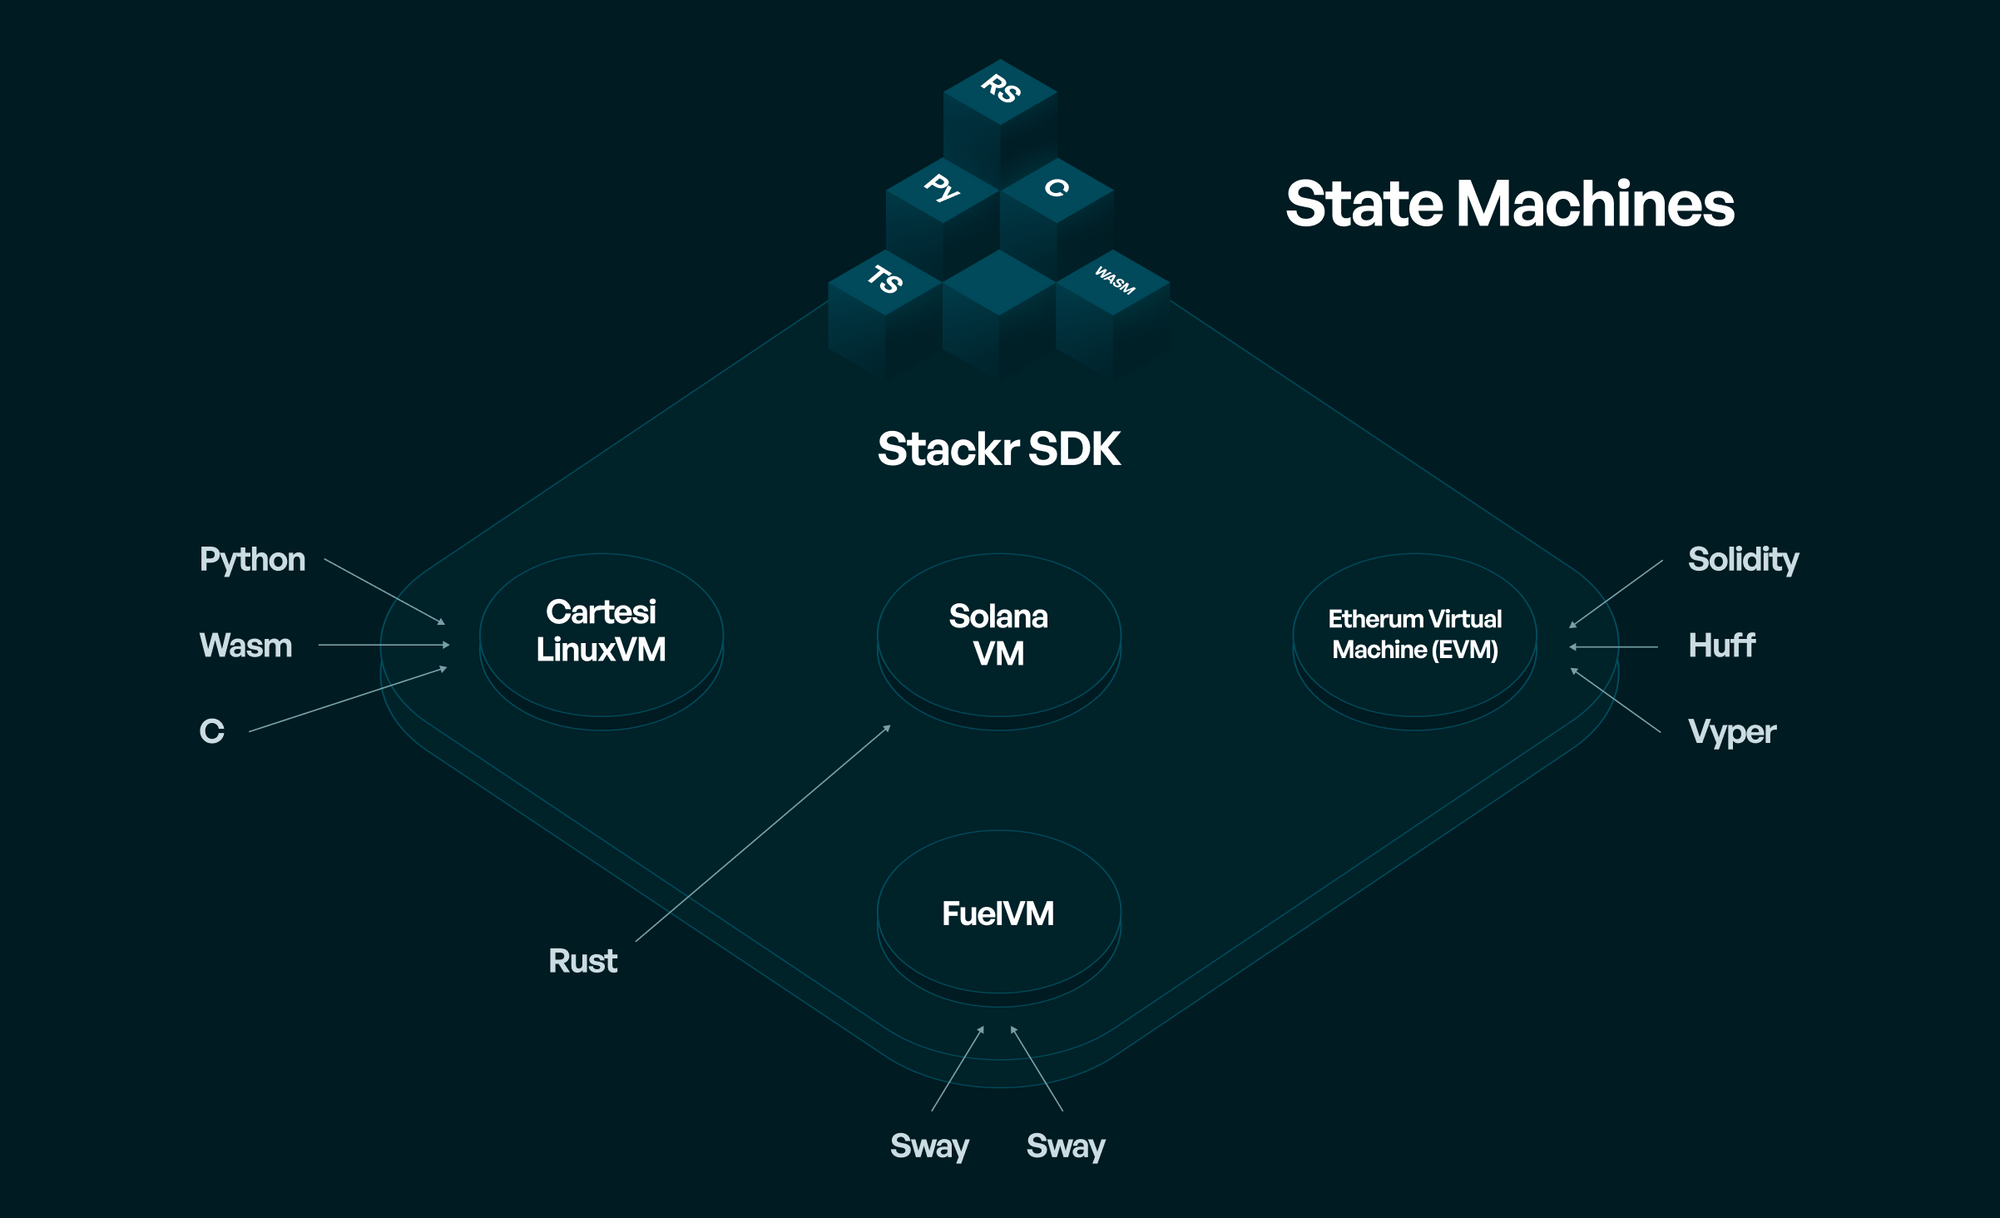 Stackr enables more efficient state machines